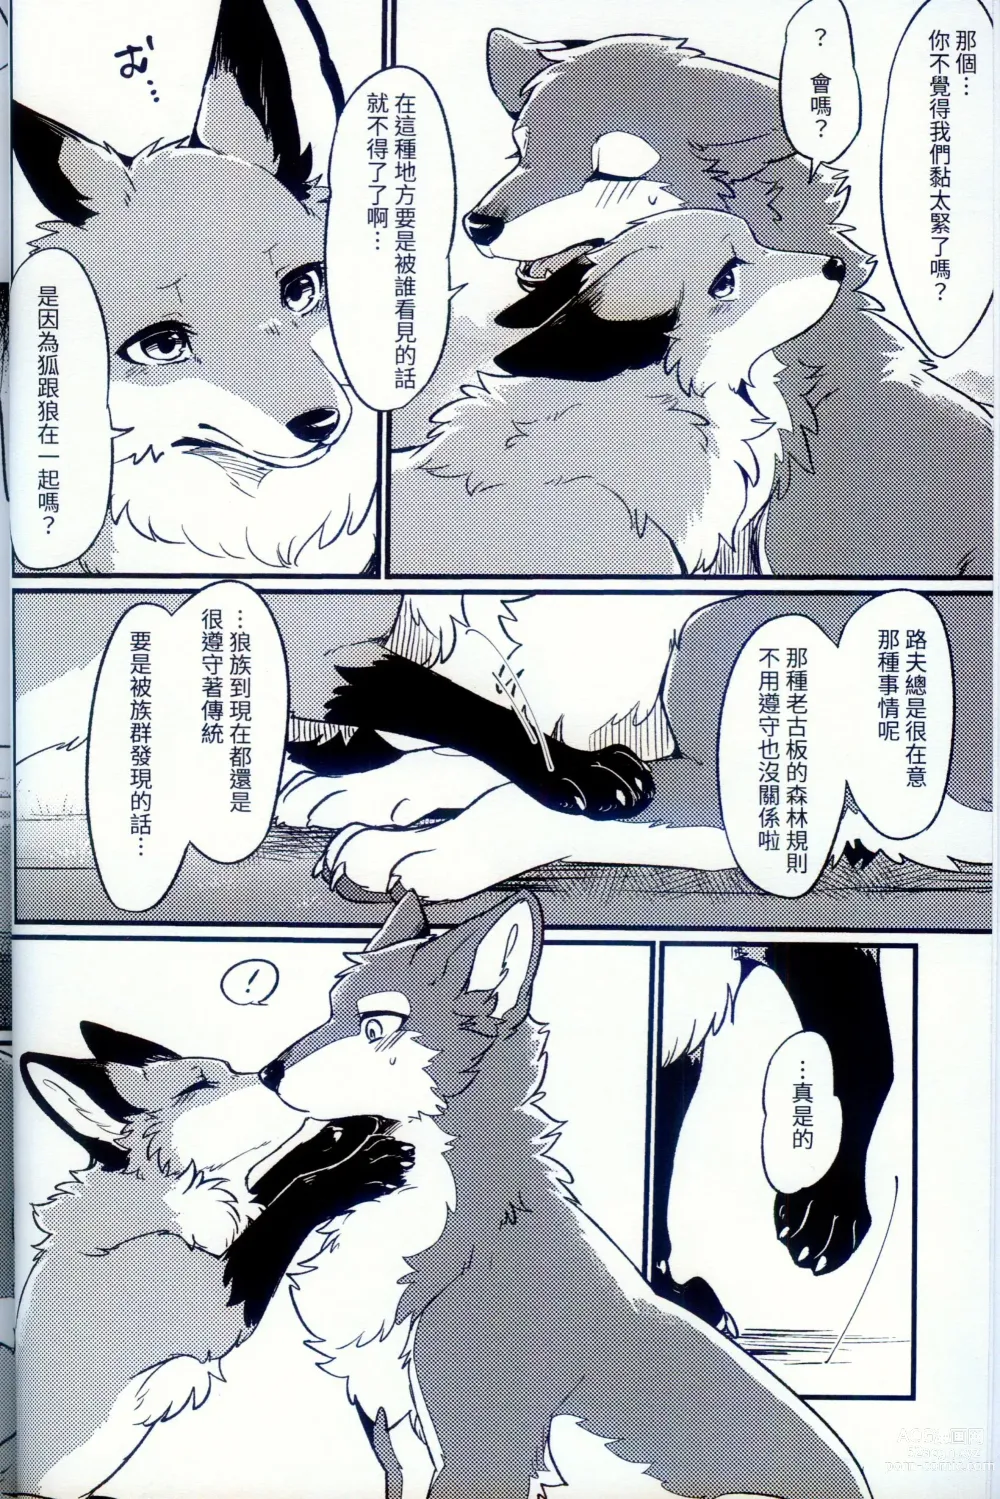 Page 4 of doujinshi IN THE FOREST (decensored)